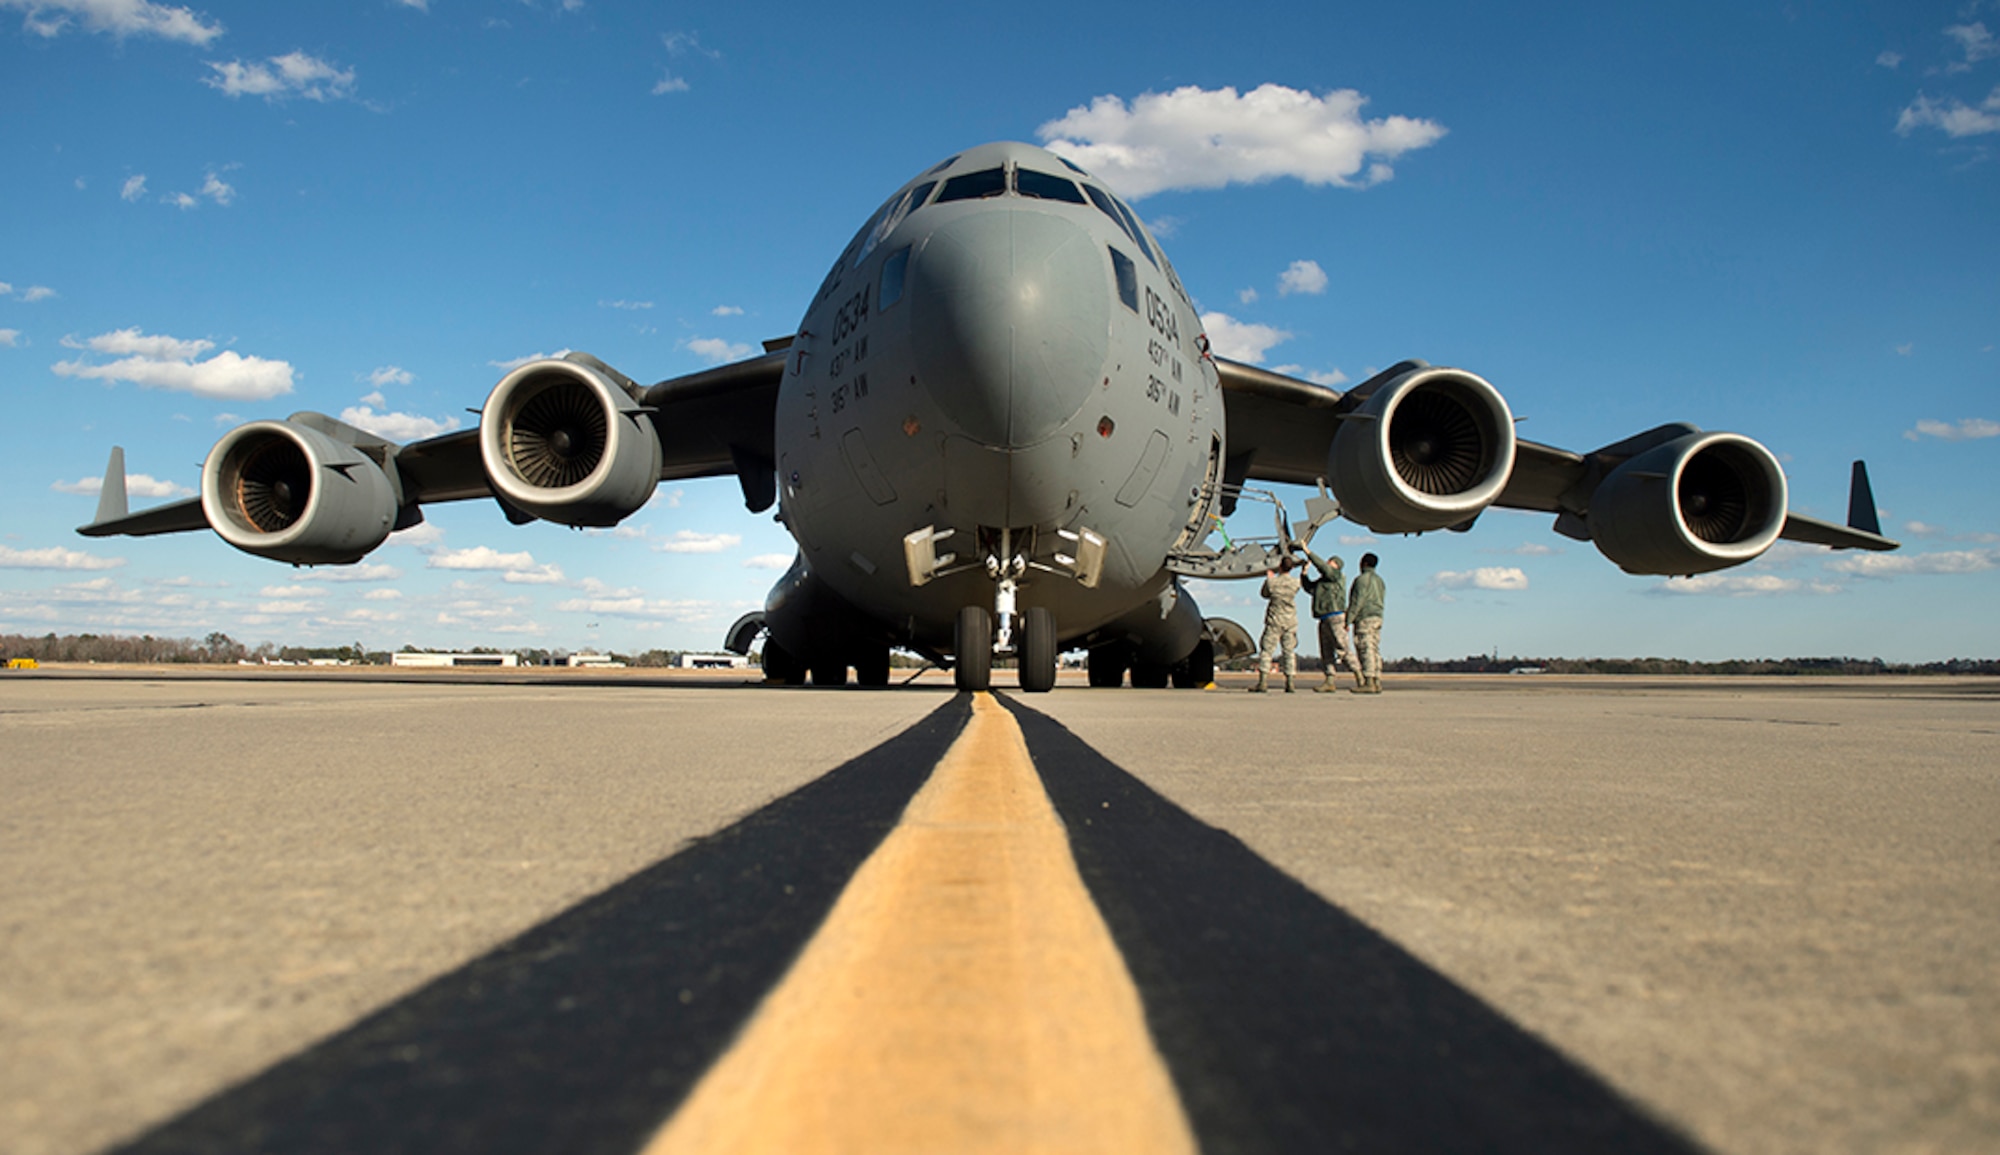 Non destructive inspection technicians assigned to the 437th Maintenance Squadron,  close the door of a C-17 Globemaster III after completing an inspection request on Feb. 18, 2015 at Joint Base Charleston, S.C. The 437th MXS NDI technicians are responsible for detecting cracks in aircraft or vehicle parts for the entire fleet at Joint Base Charleston. (U.S. Air Force photo by/Staff Sgt. Vernon Young Jr.)